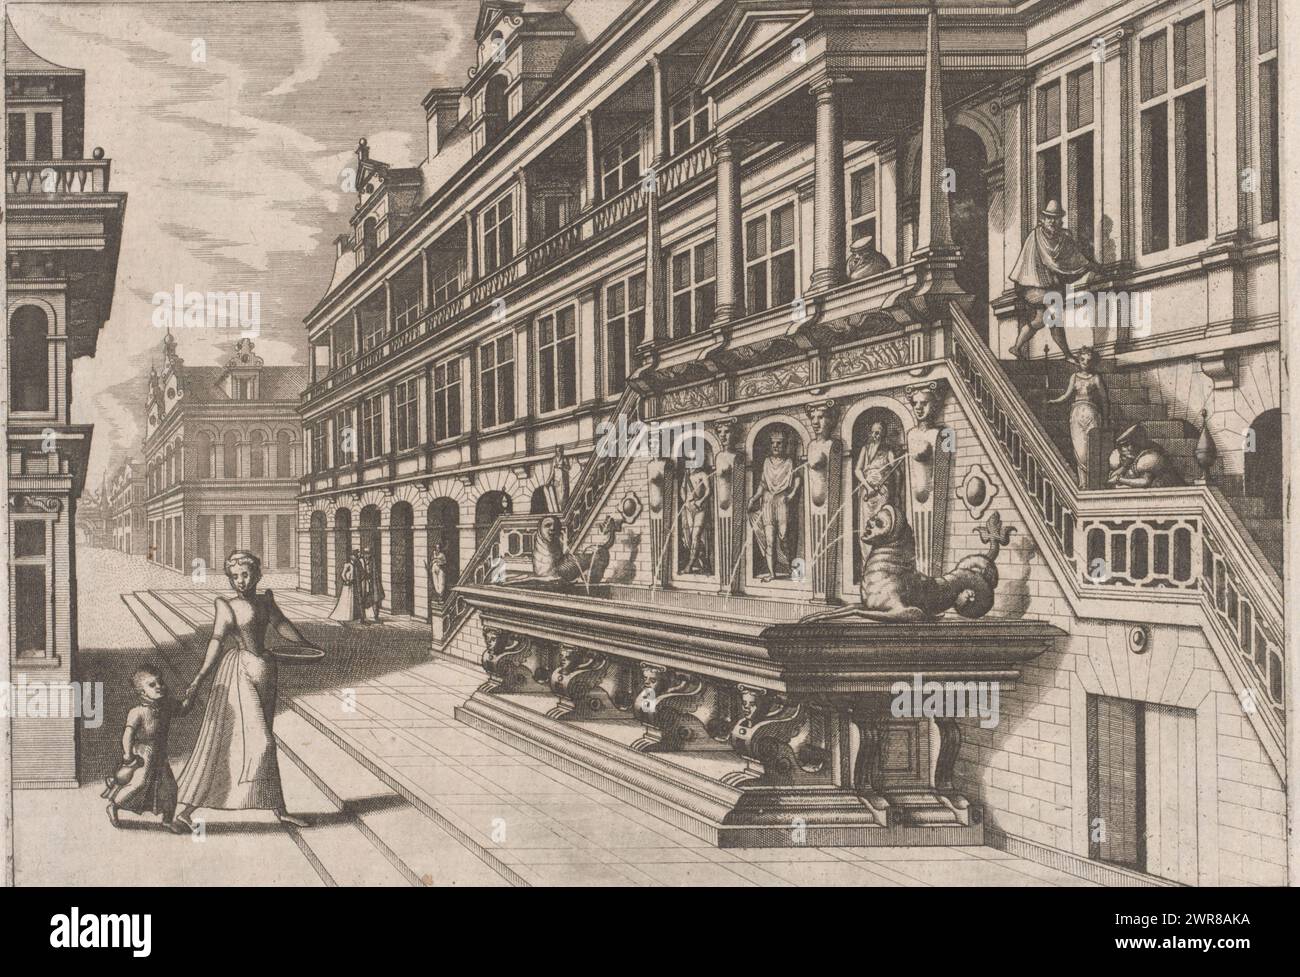 Street view with wall fountain, Artis Perspectivae (...) (series title), Fountain in front of a platform. The fountain consists of an elongated basin, supported by four sphinxes in scroll work. There are four herms spouting water against the wall. In between there are three statues in niches. On the left on the street is a woman holding a child., print maker: Joannes van Doetechum (I), print maker: Lucas van Doetechum, after design by: Hans Vredeman de Vries, Antwerp, 1568, paper, etching, height 172 mm × width 244 mm, print Stock Photo